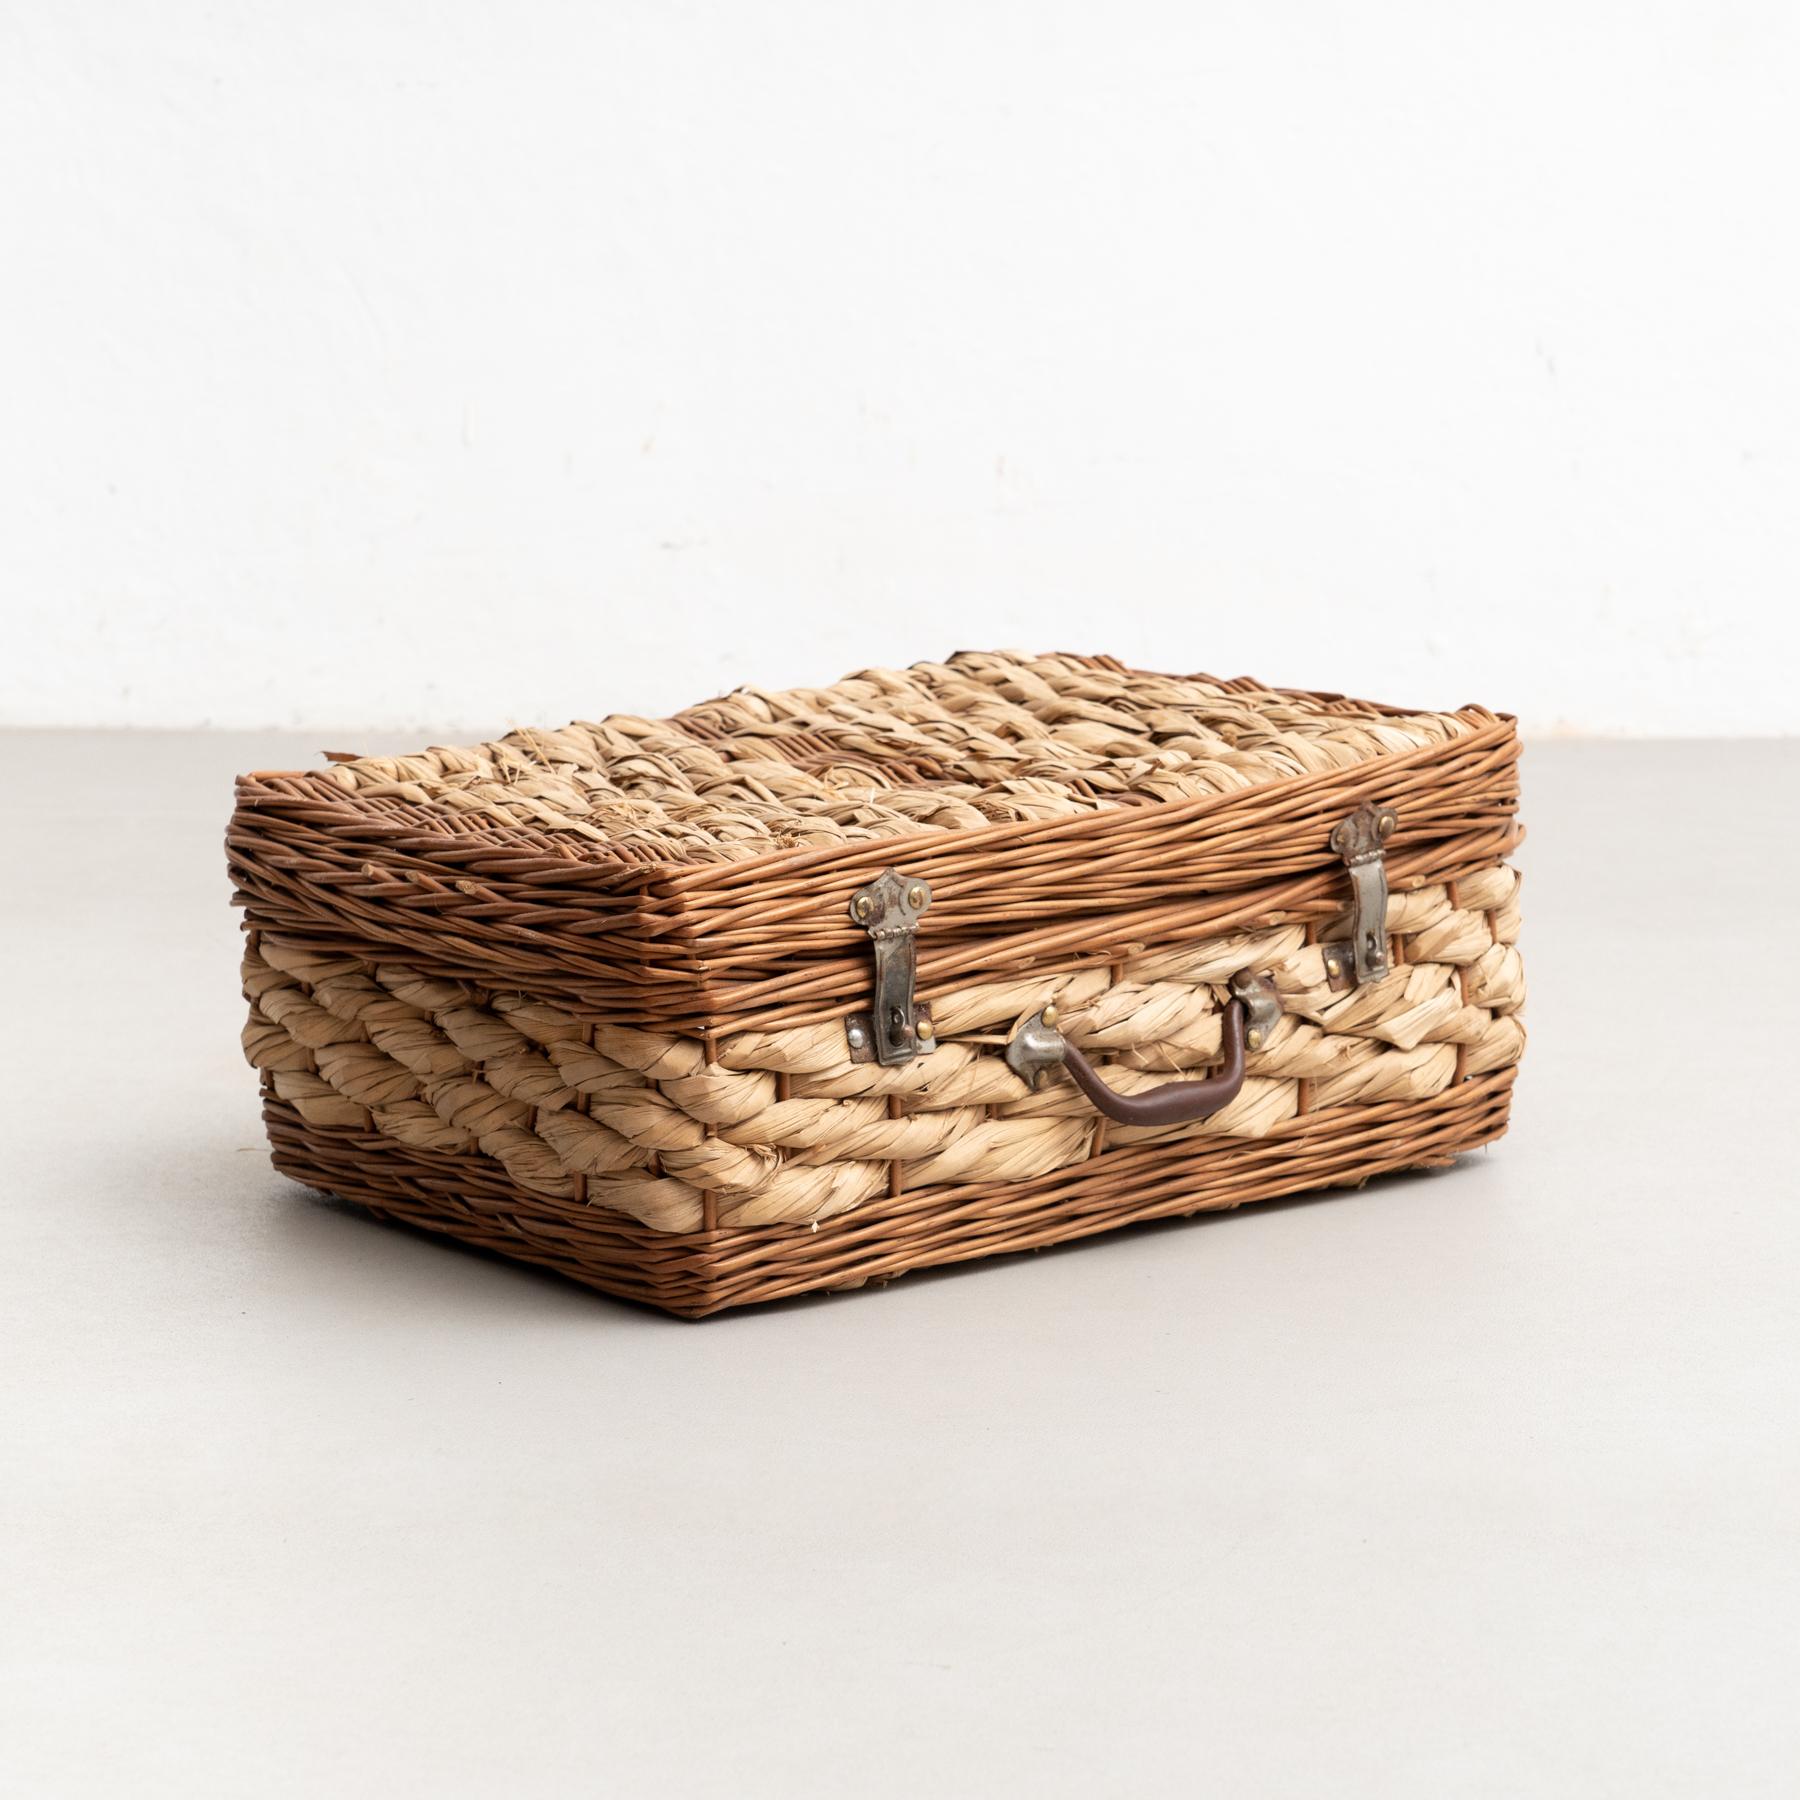 Vintage traditional woven wicker case in a classic pattern.

Made by an unknown manufacturer, in France, circa 1940

Materials:
Wicker.

In original condition, with minor wear consistent of age and use, preserving a beautiful patina.